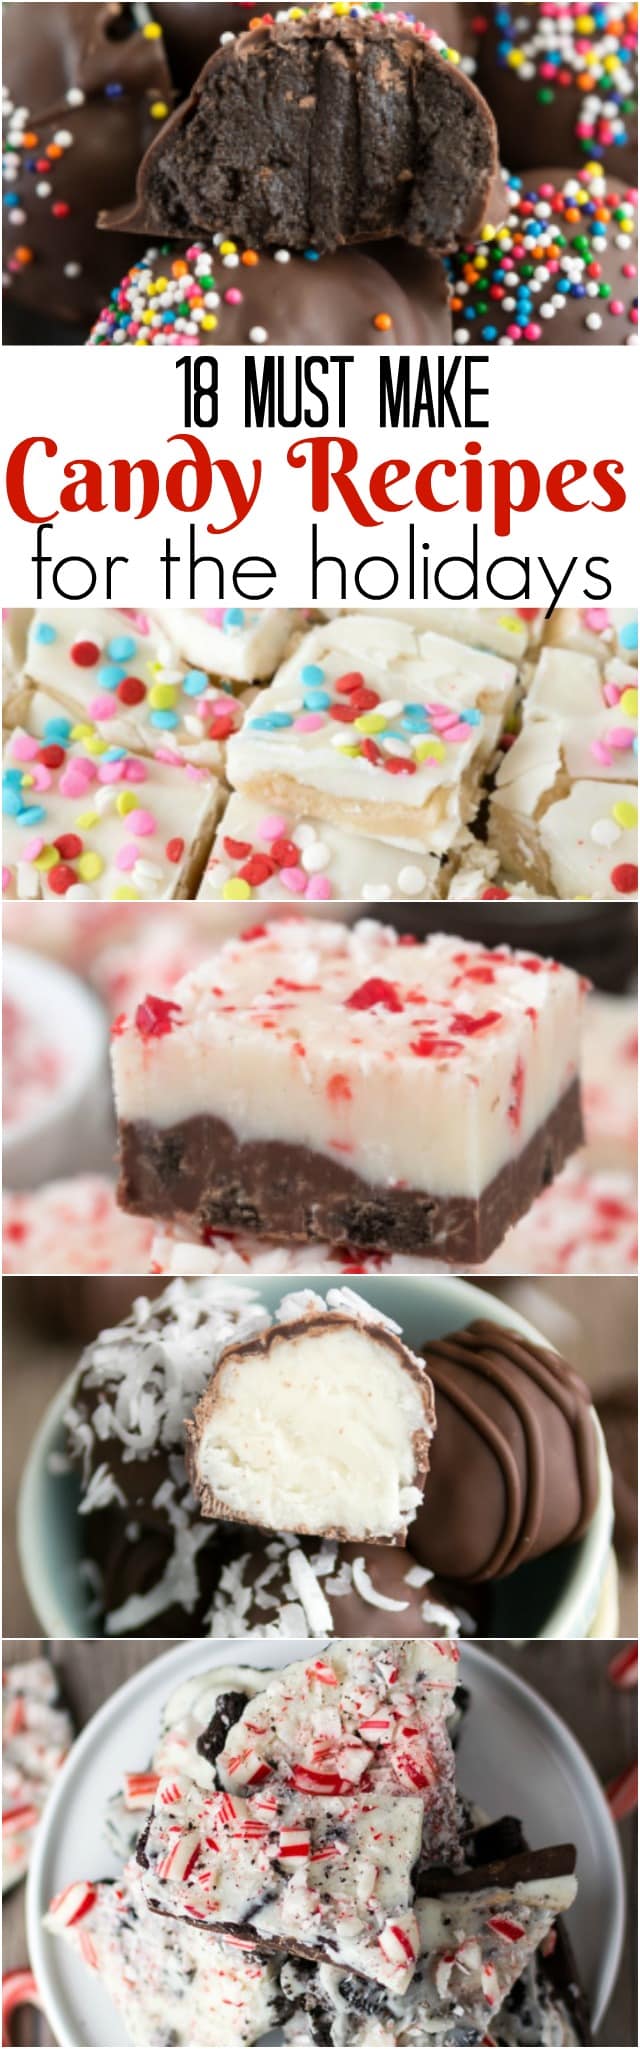 18 Must Make Candy Recipes perfect for the holidays! Truffles, bark, fudge and more!